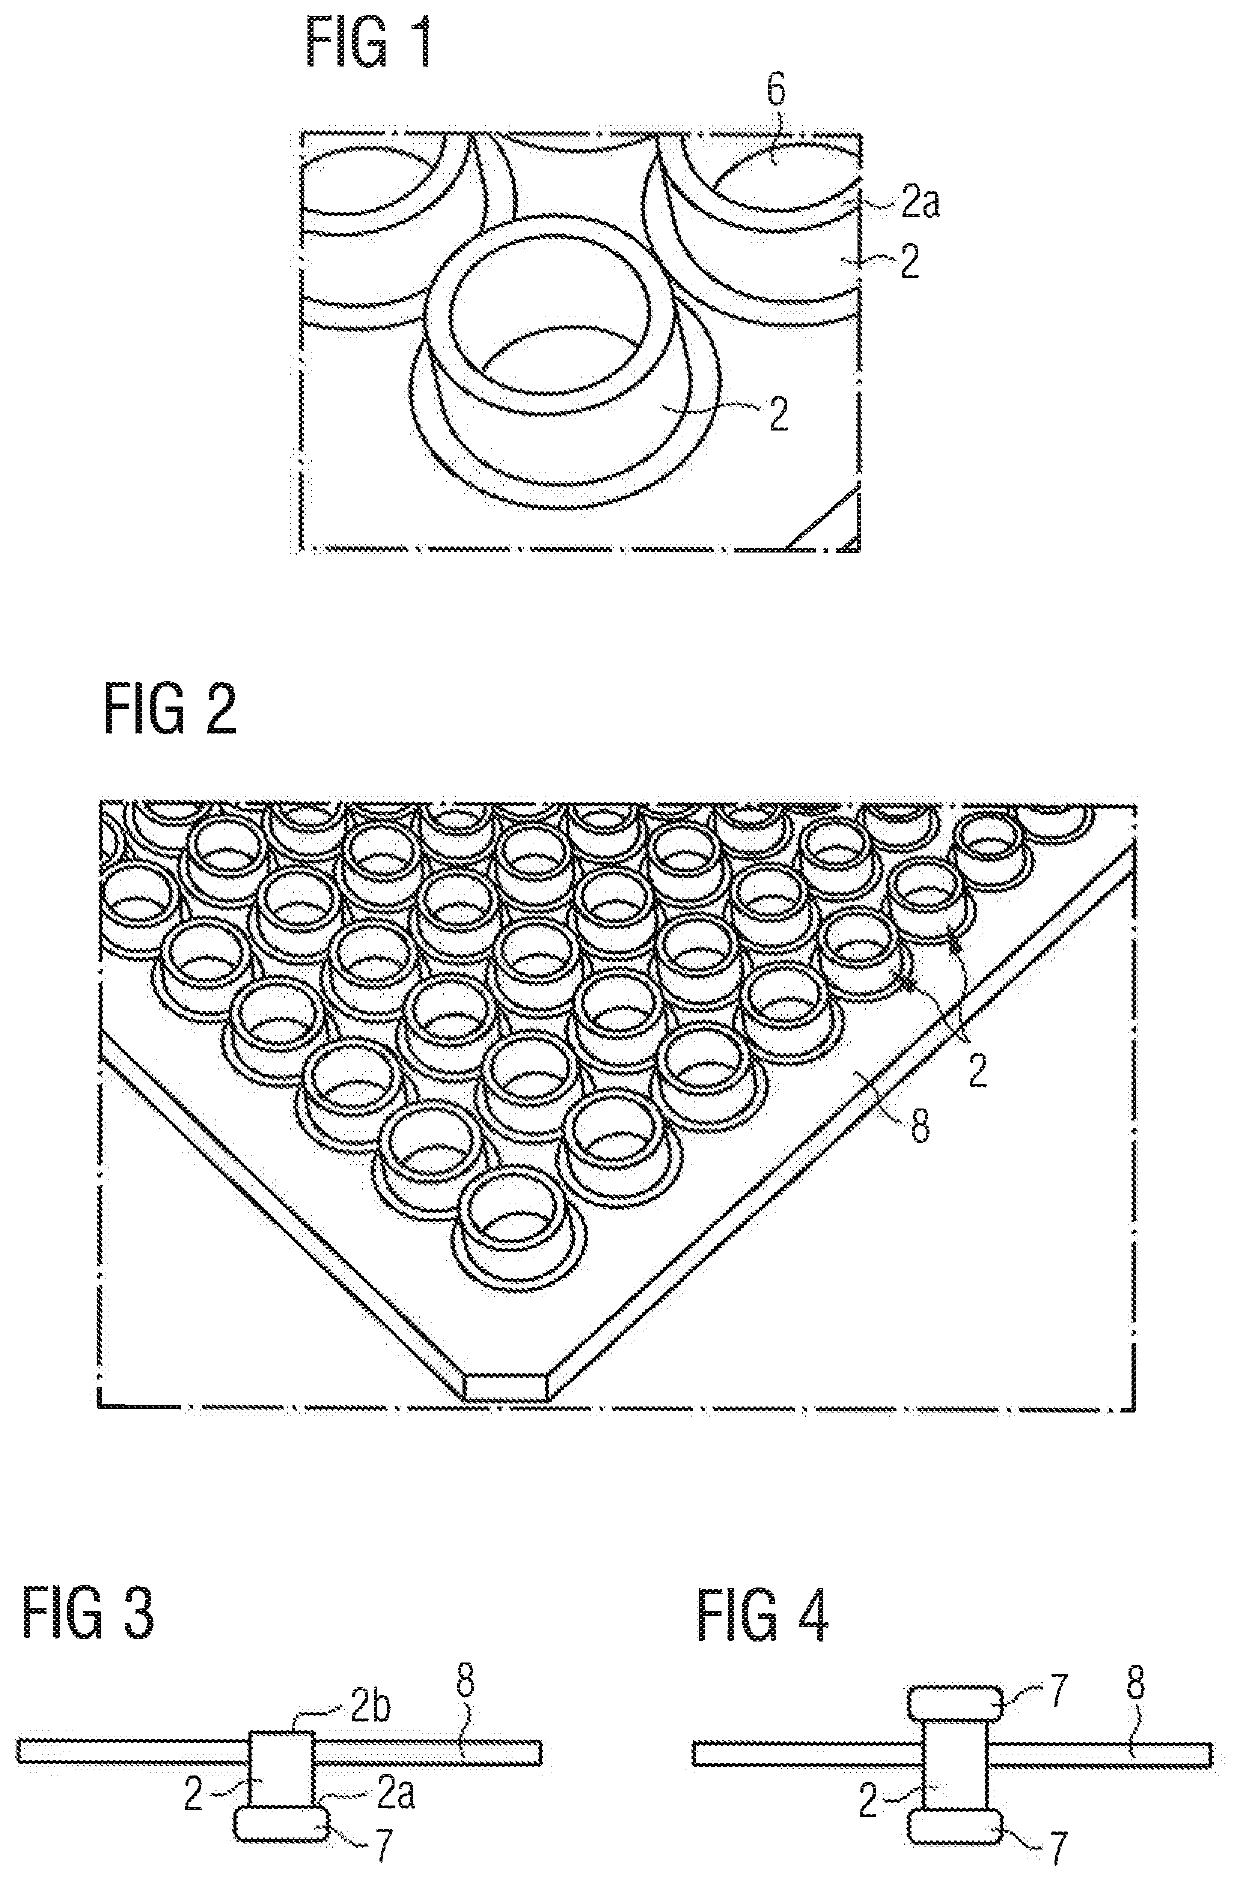 Method for Producing a Gas-Tight Metal-Ceramic Join and Use of the Gas-Tight Metal-Ceramic Join